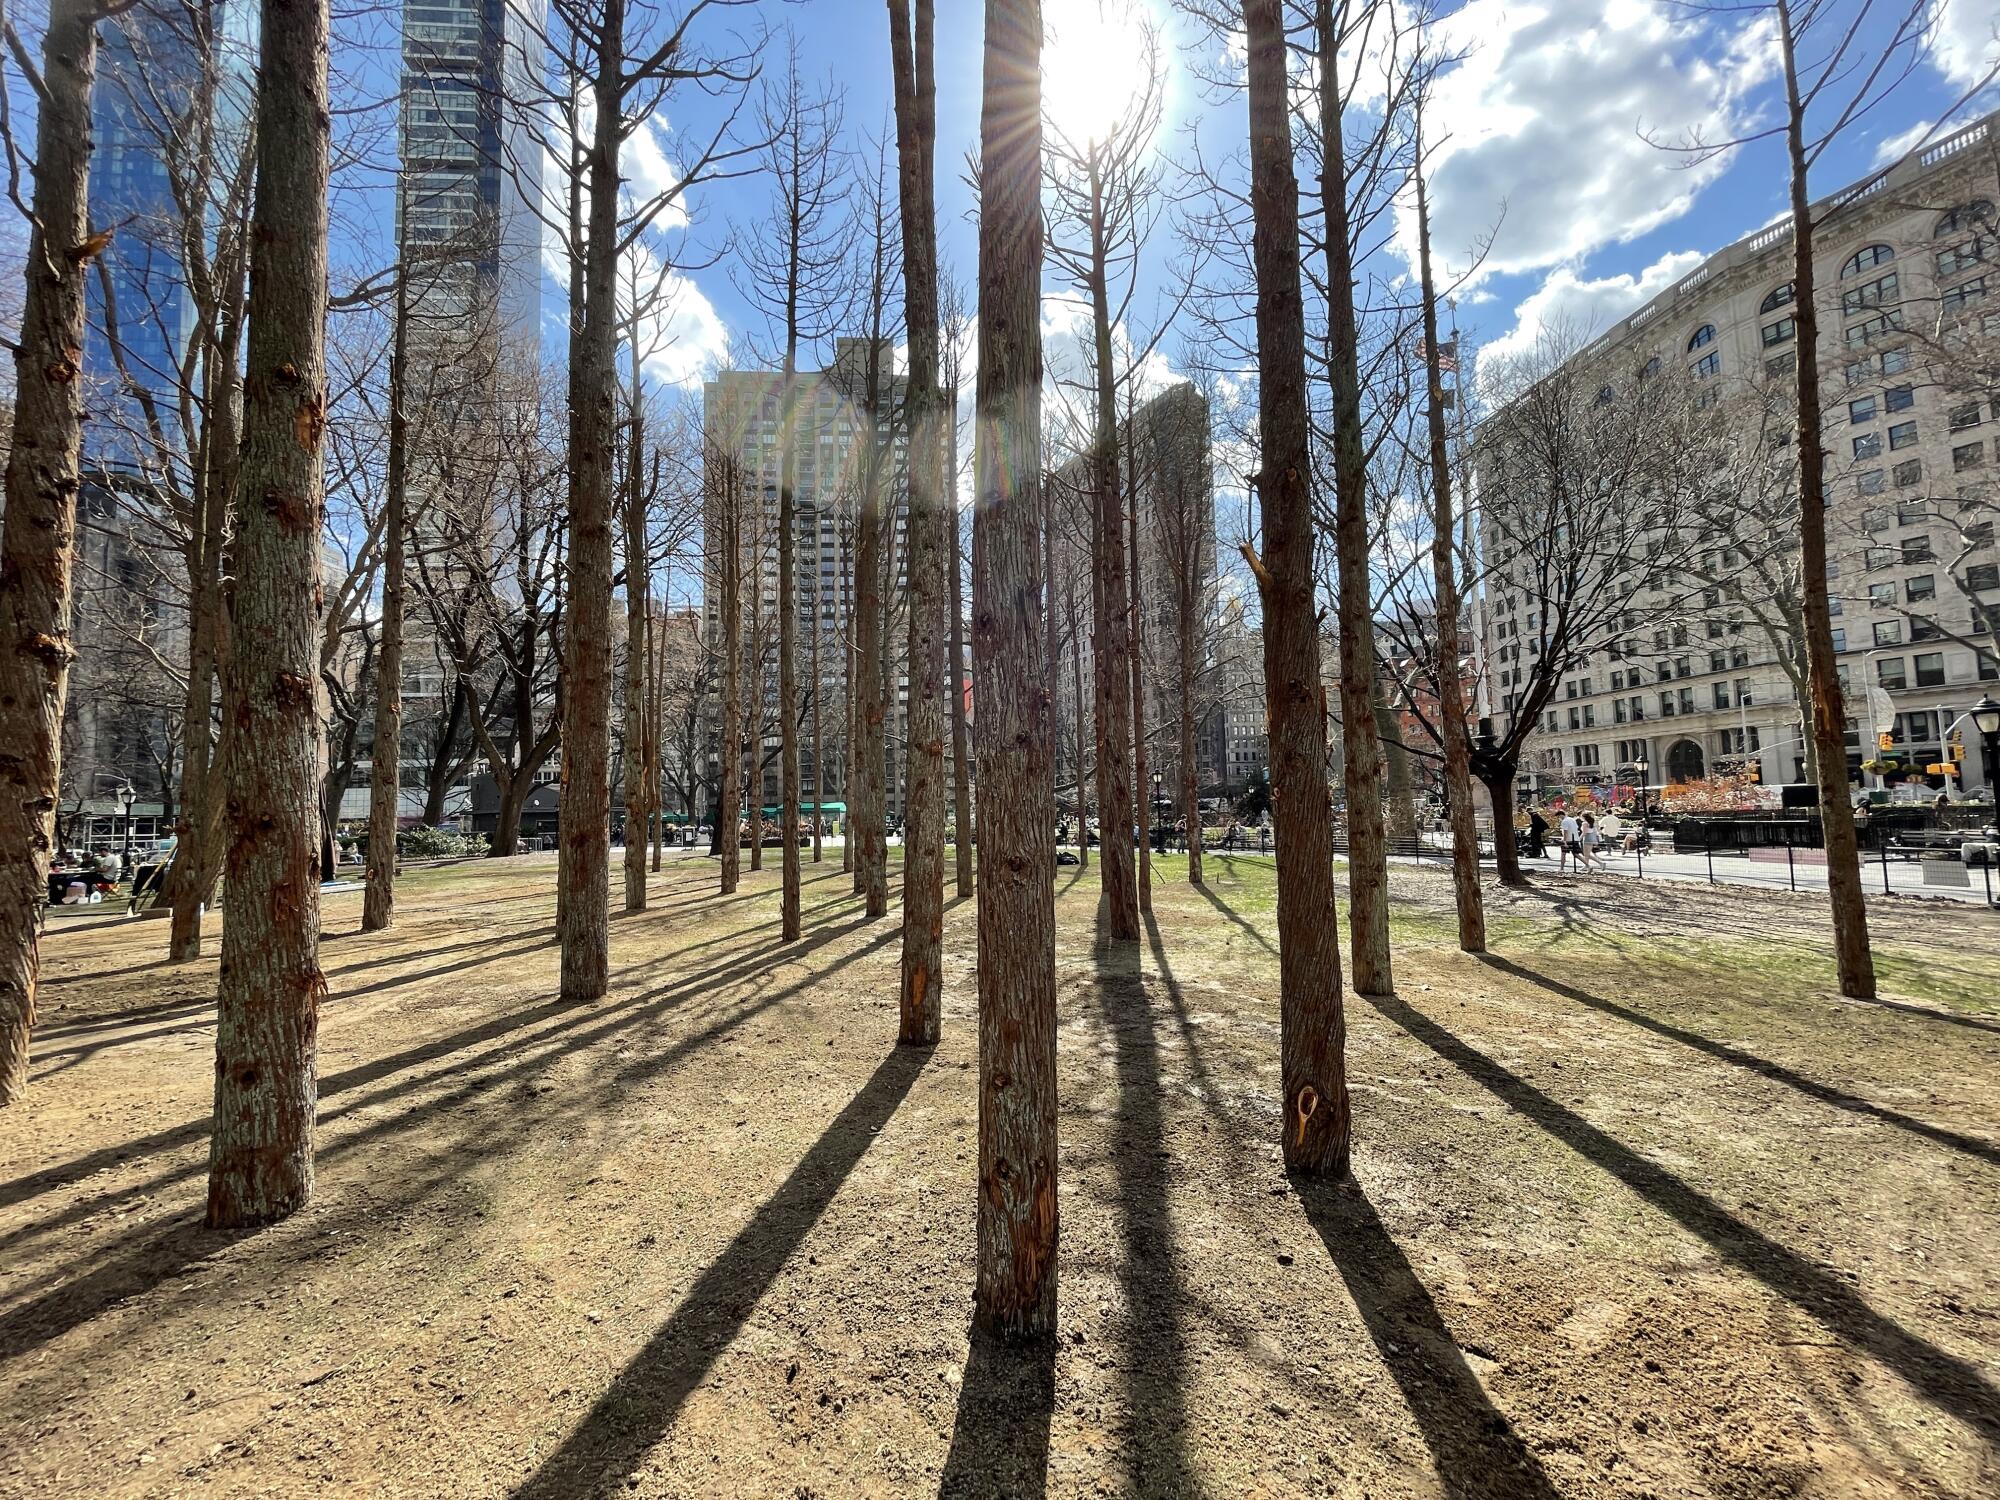 A horizontal view of "Ghost Forest" shows the deadened tree trunks casting long shadows on the ground.